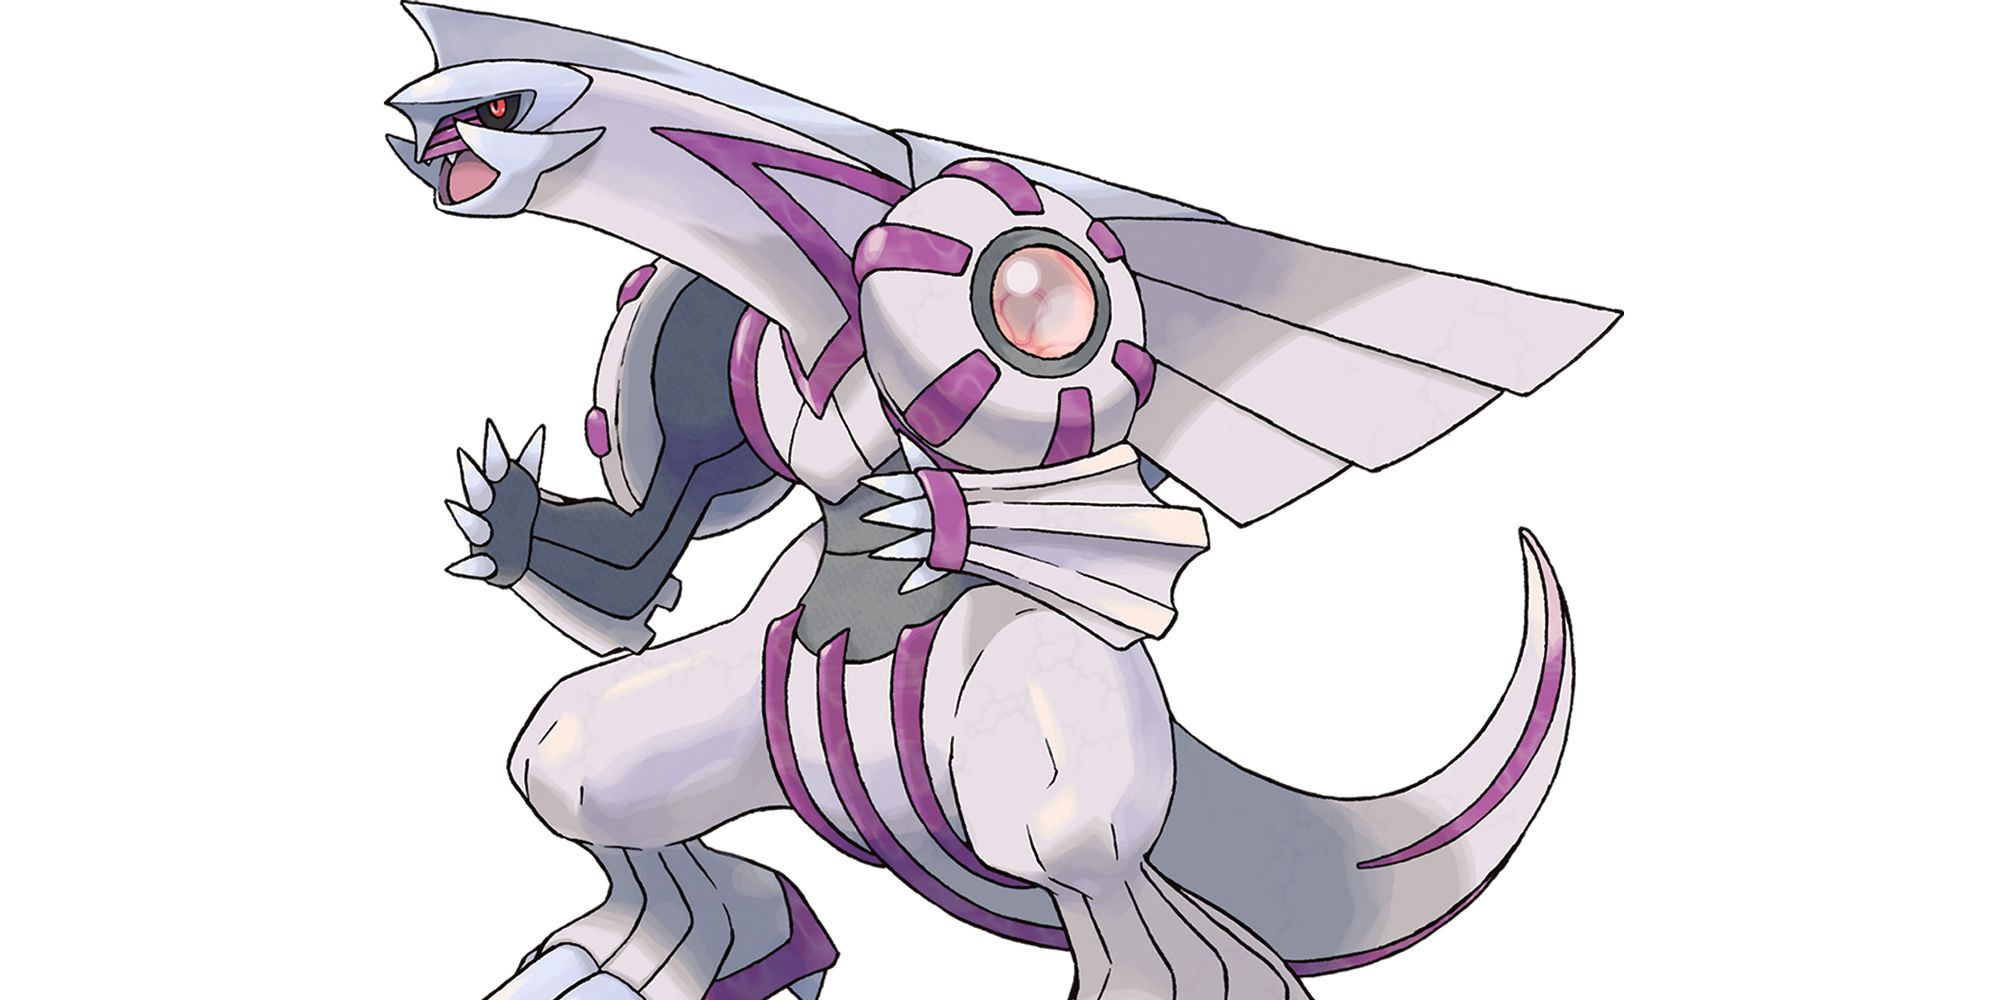 Palkia as depicted in promotional art for Pokemon Pearl